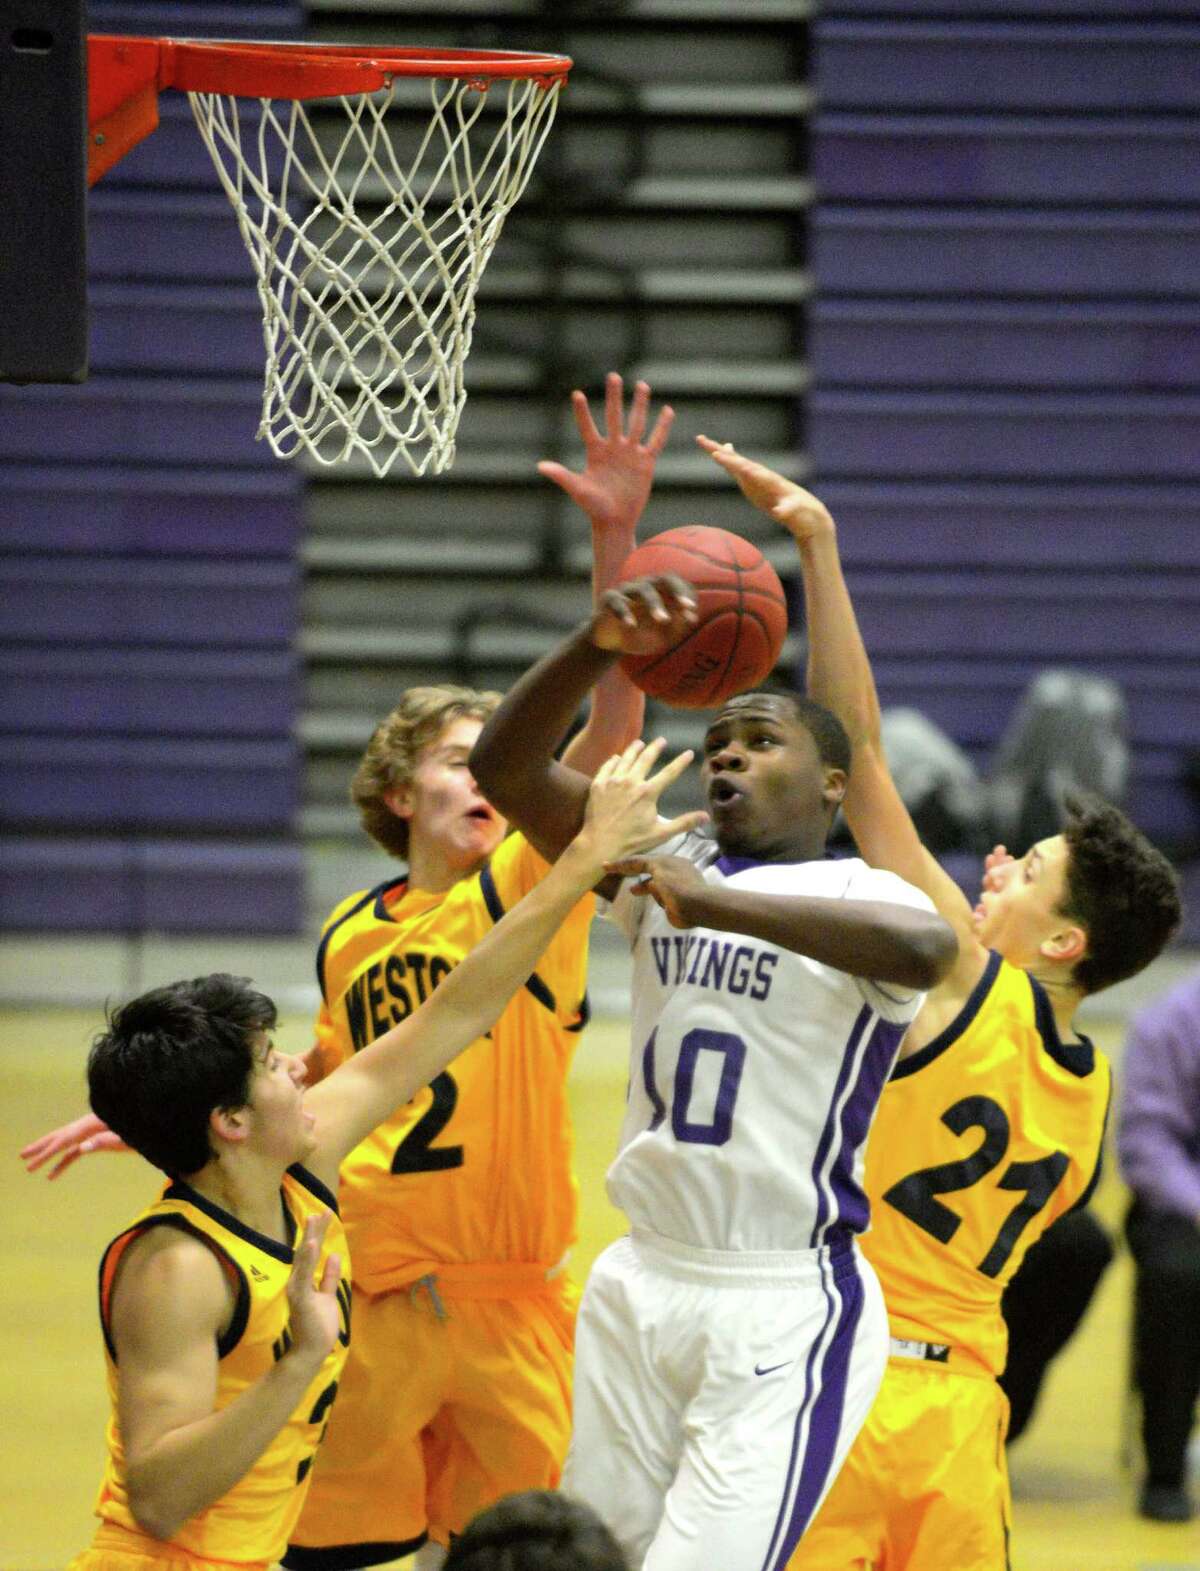 Westhill’s Tyrell Alexander is fouled while battling for the ball with Weston’s Andrew Folger (3), Chris Hover (2) and Hamilton Forsythe (21) during the Vikings’ 66-42 victory Thursday.